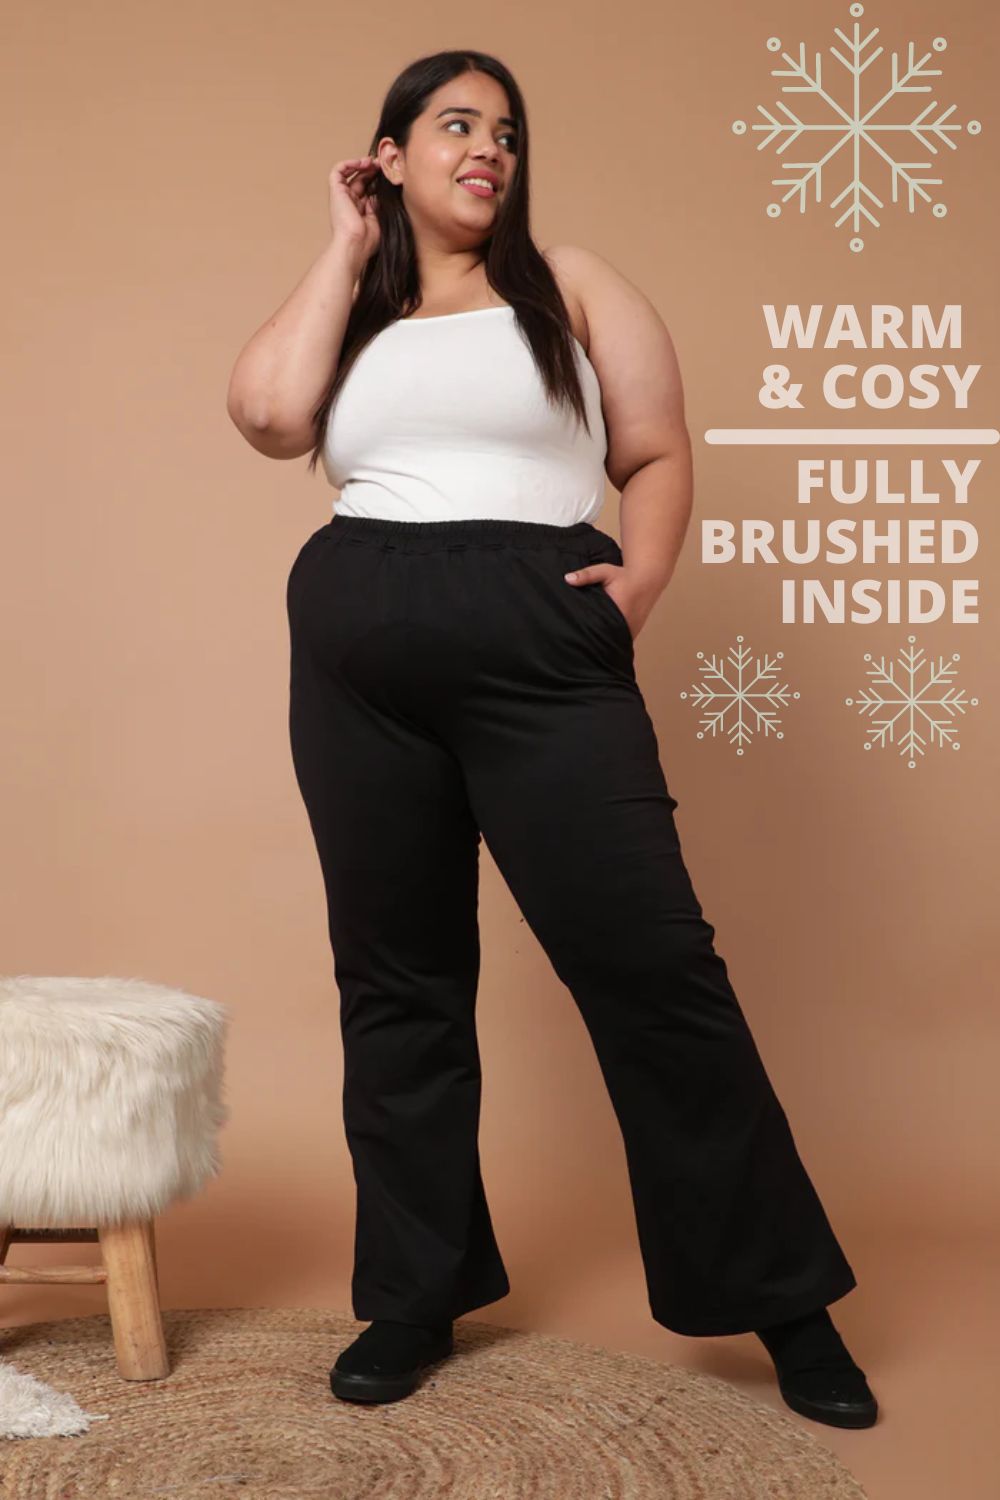 These fleece-lined winter leggings have been described by shoppers as just  like Lululemon | Daily Mail Online